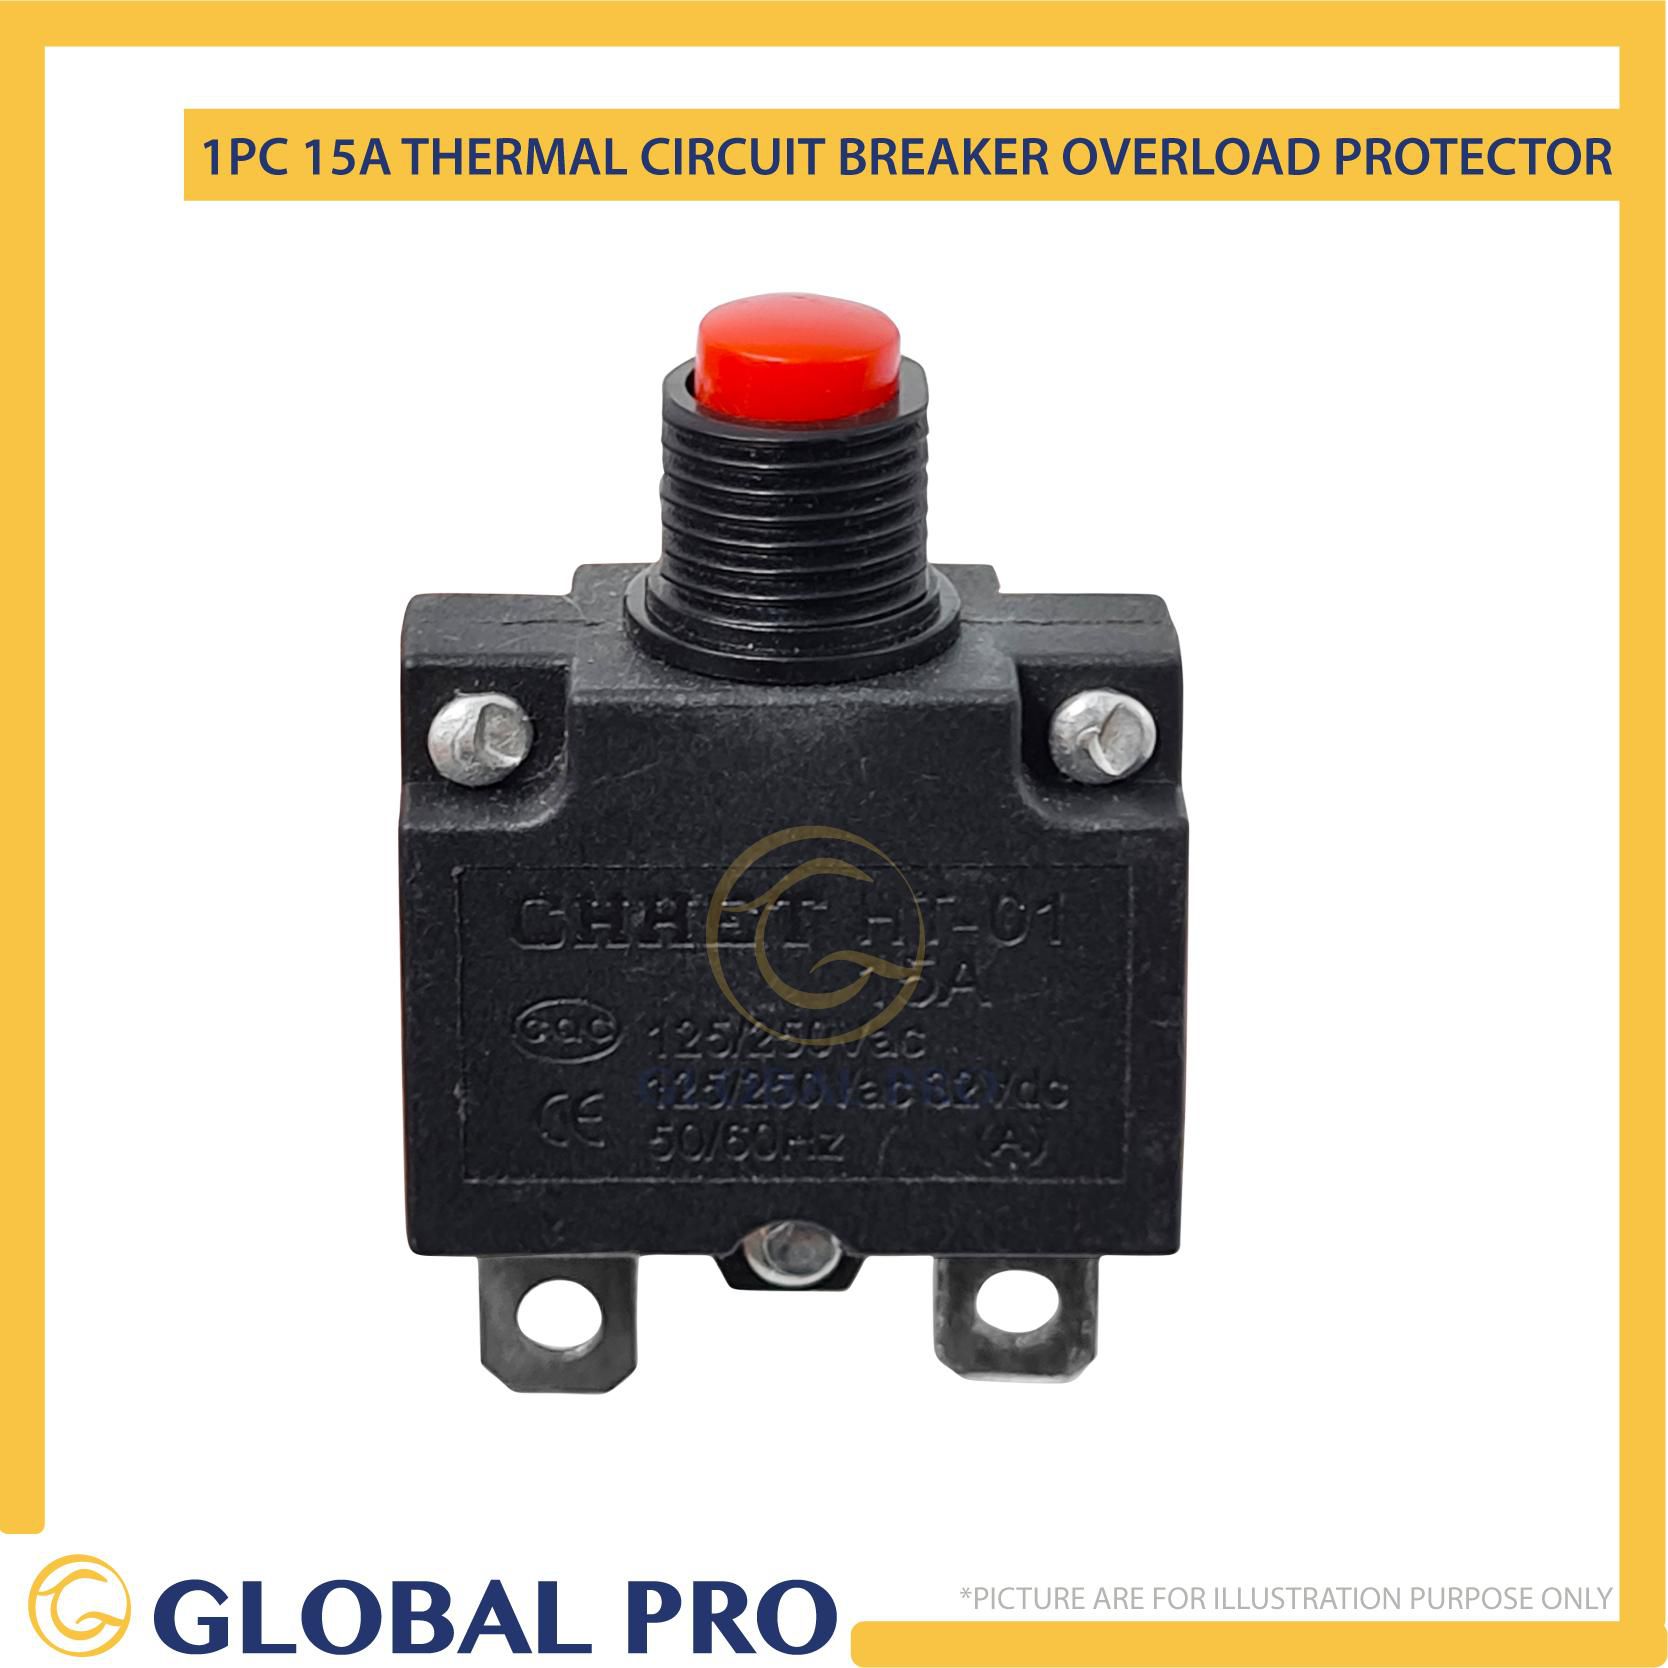 1PC 15A Thermal Circuit Breakers 220-250V Overload Protector Switch